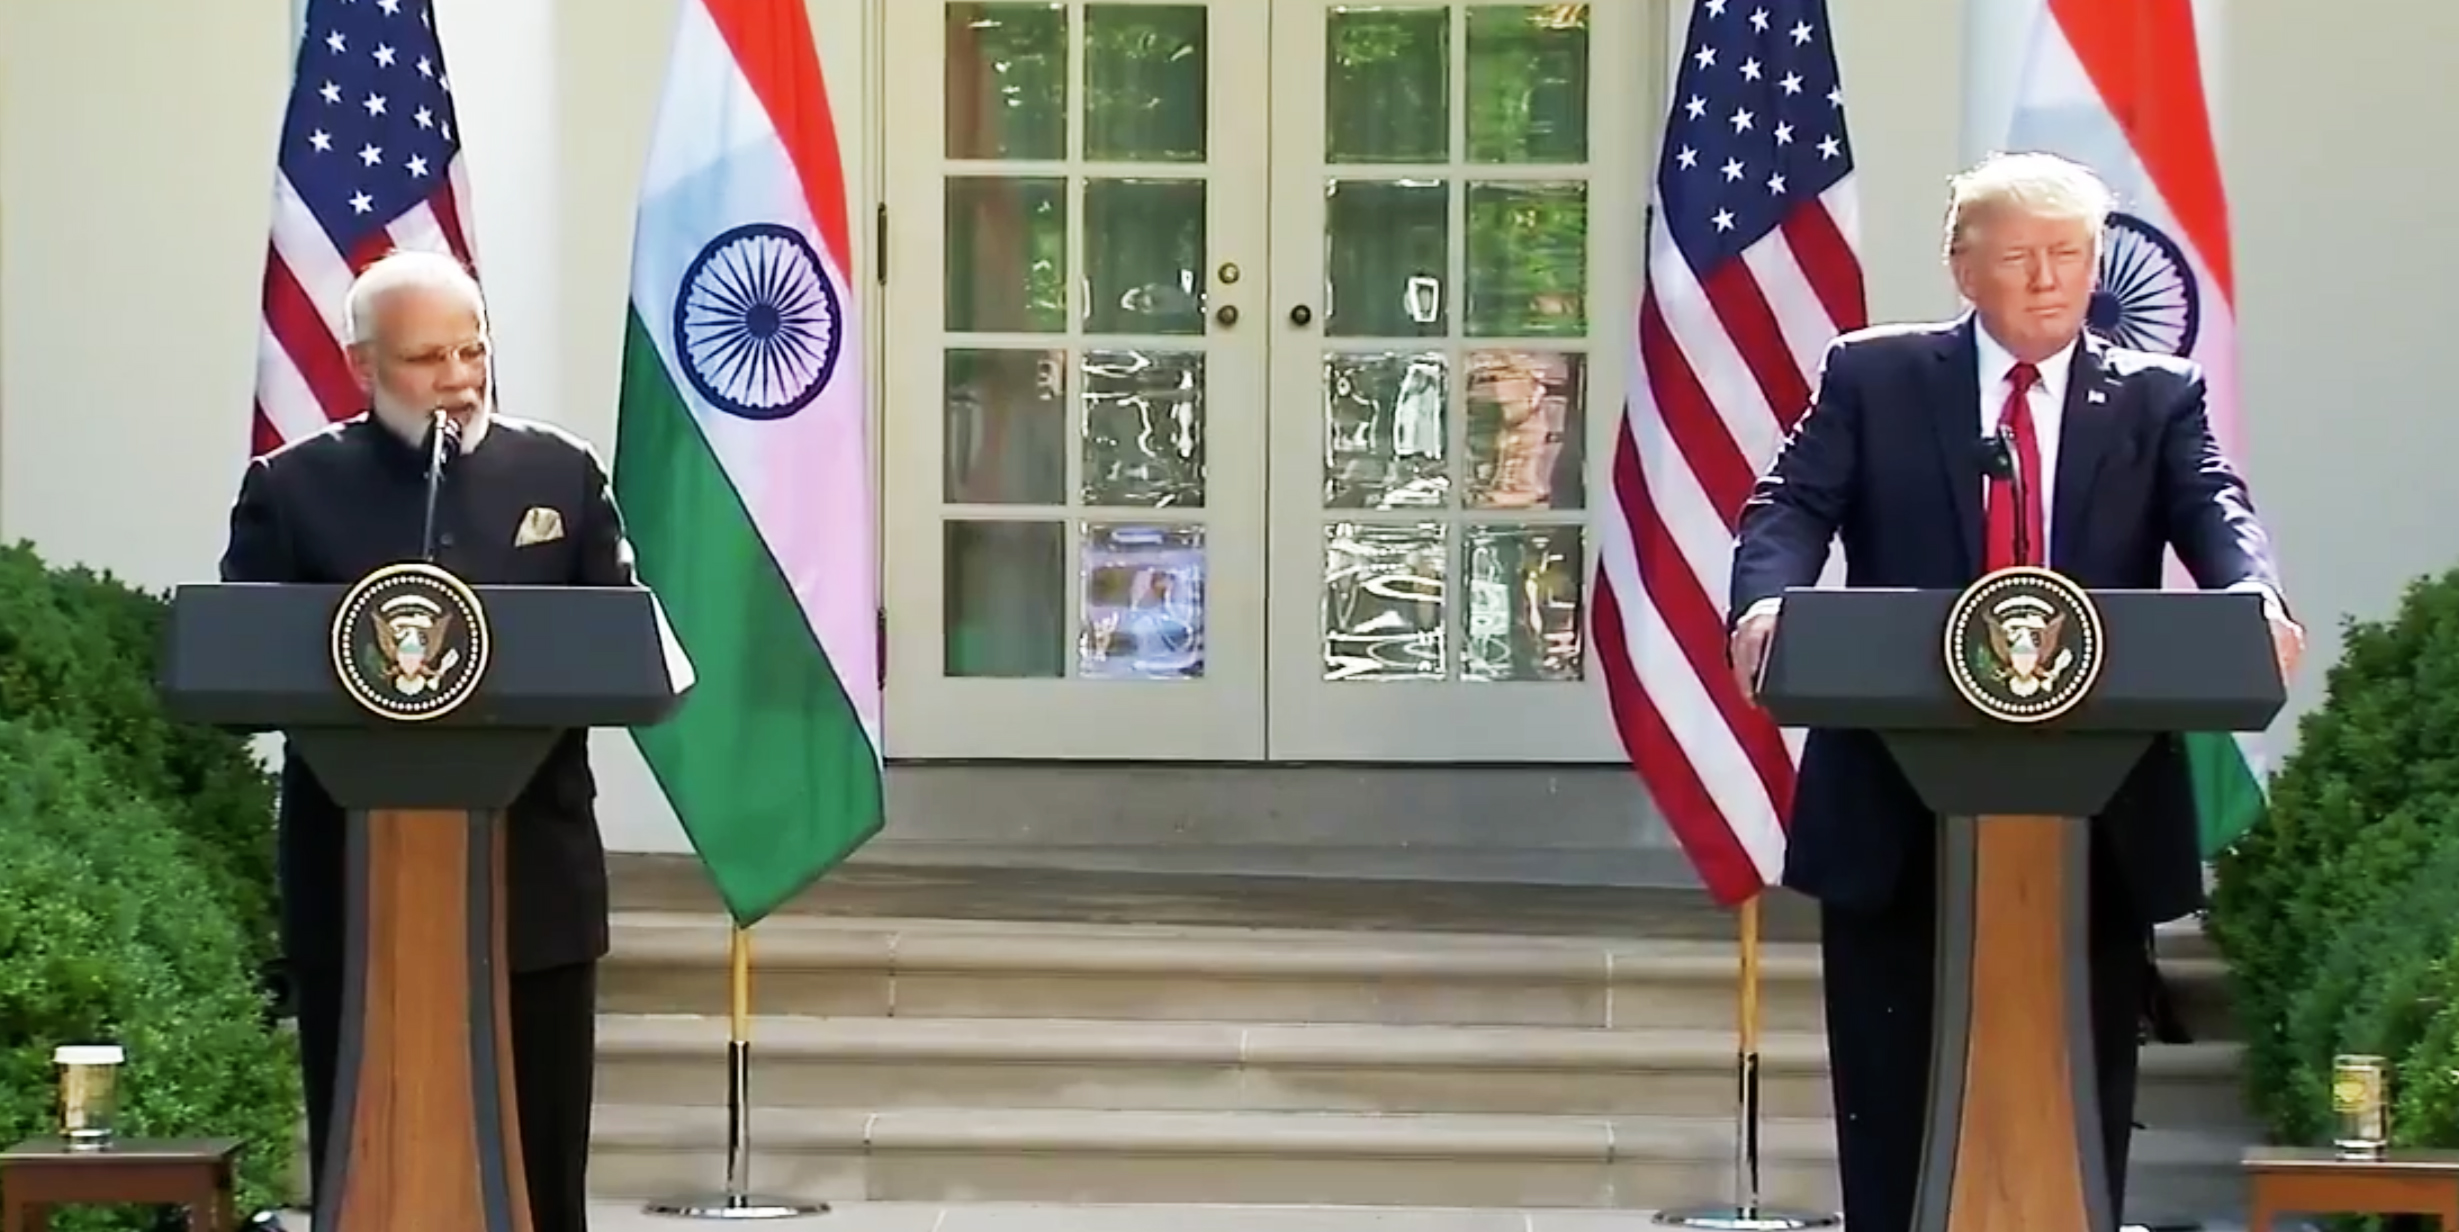 President Donald Trump and Indian Prime Minister Narendra Modi making joint statements in the Rose Garden of the White House in Washington